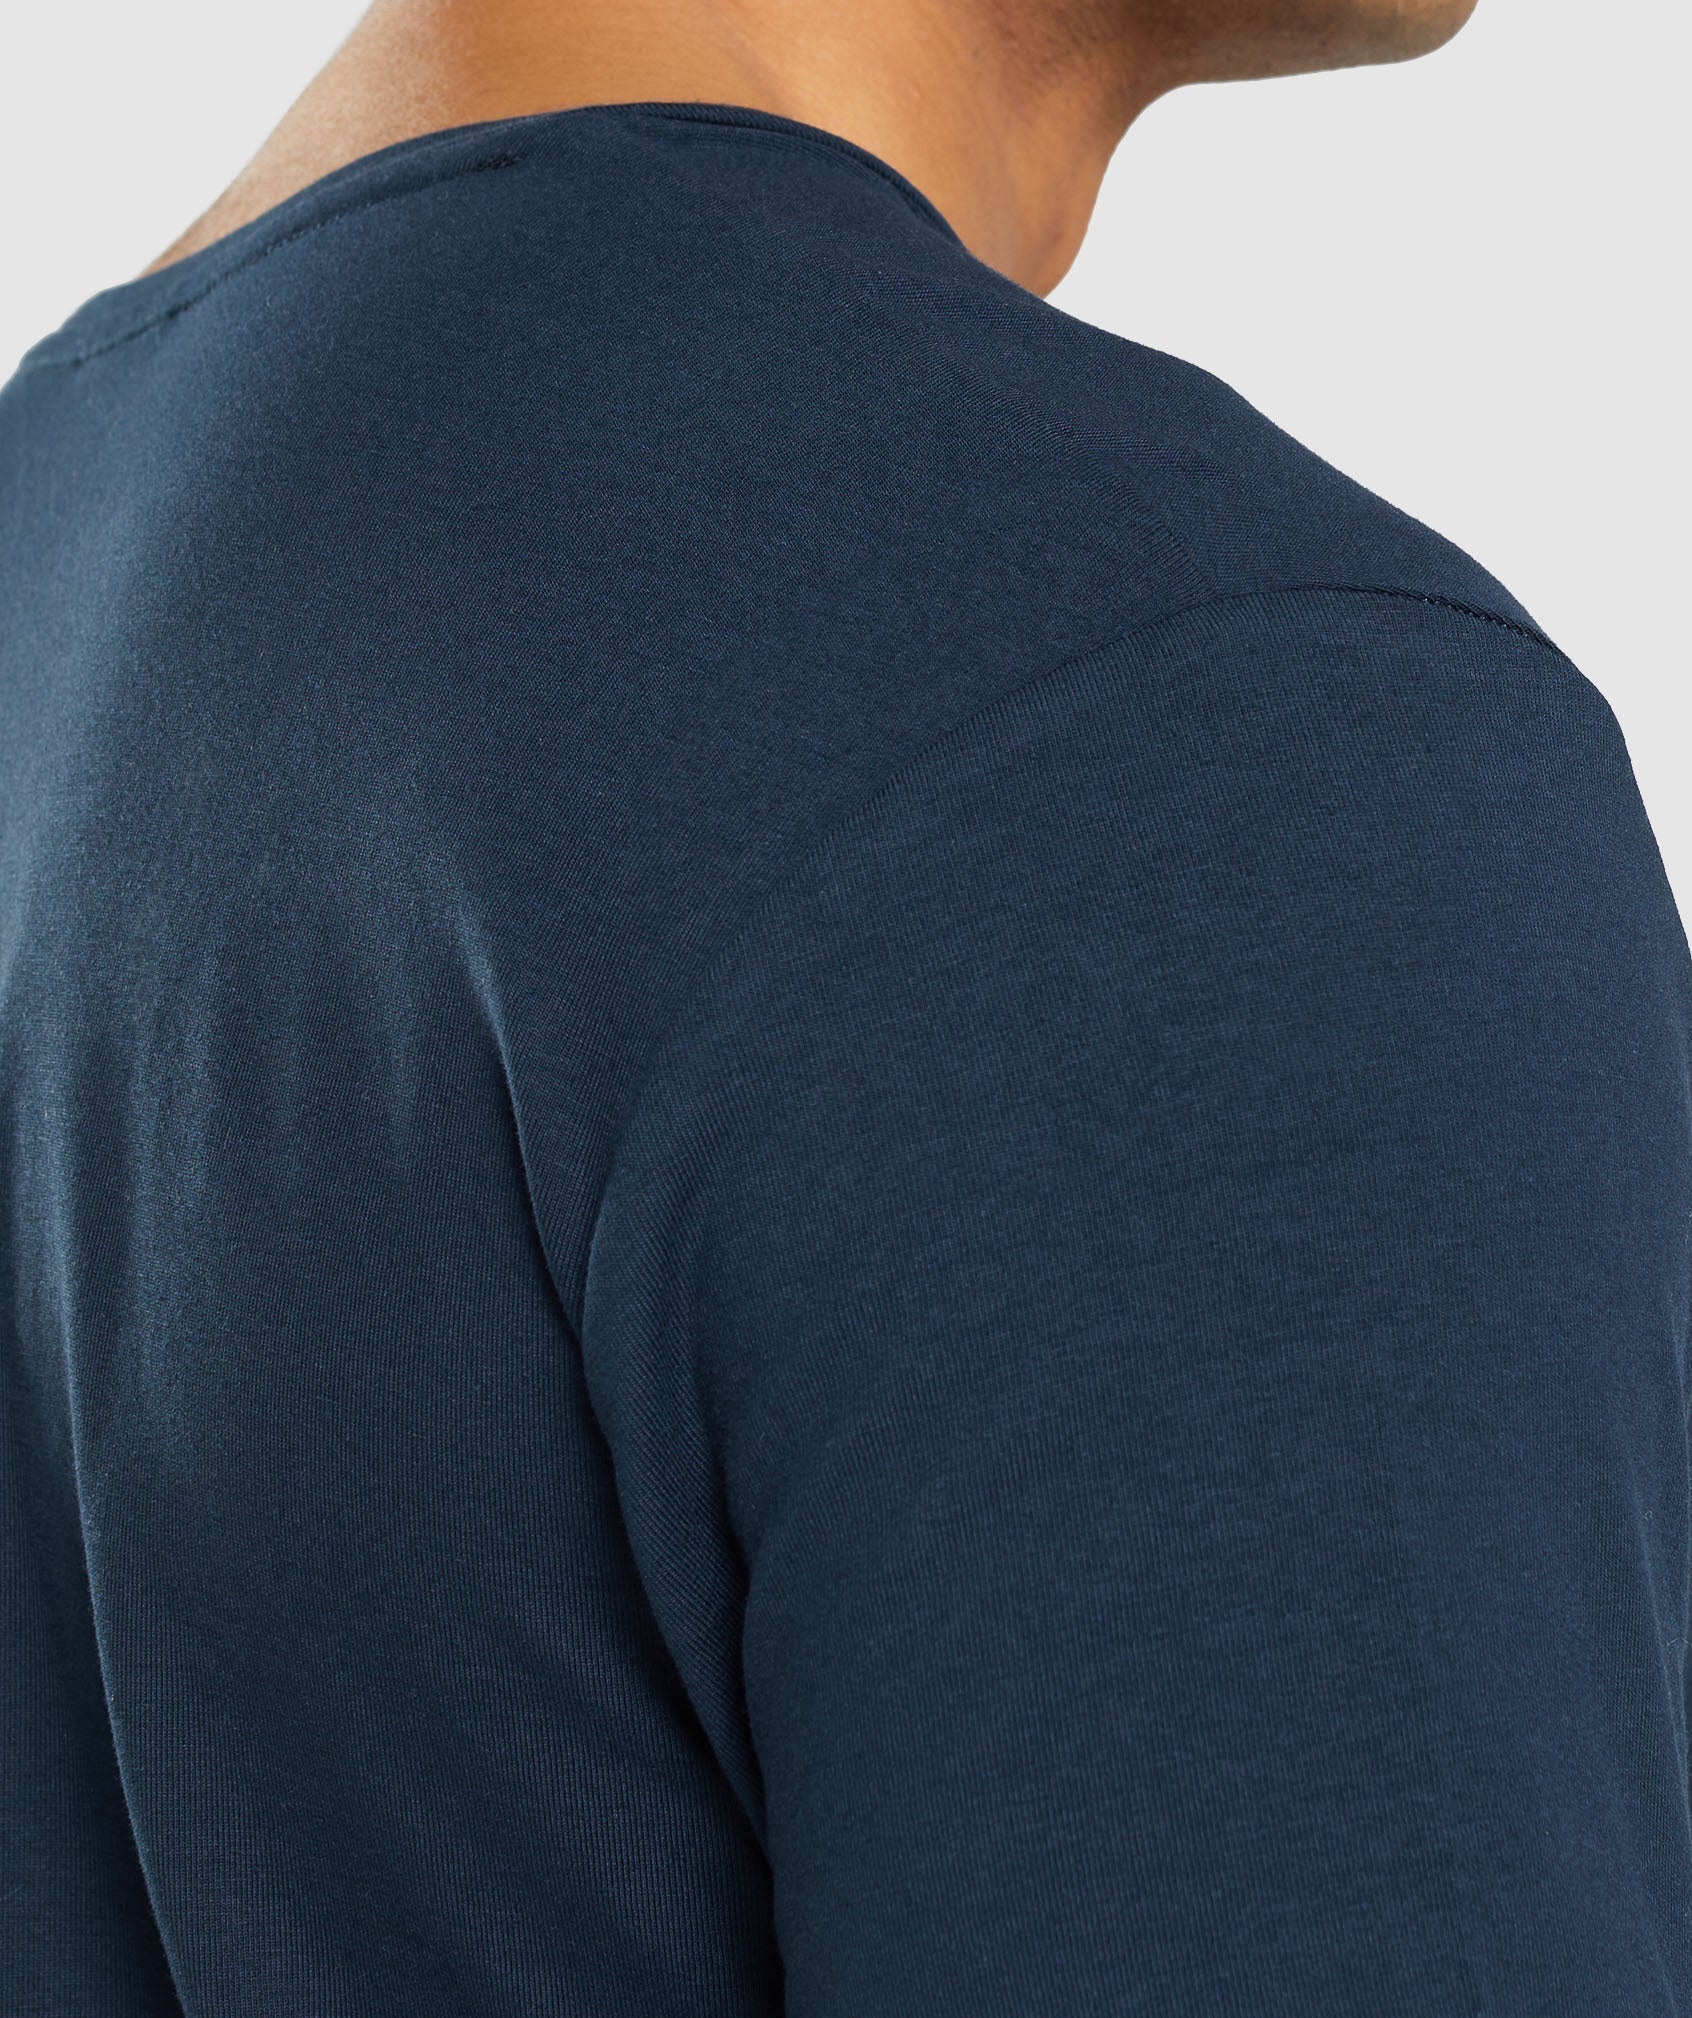 Essential T-Shirt in Navy - view 6